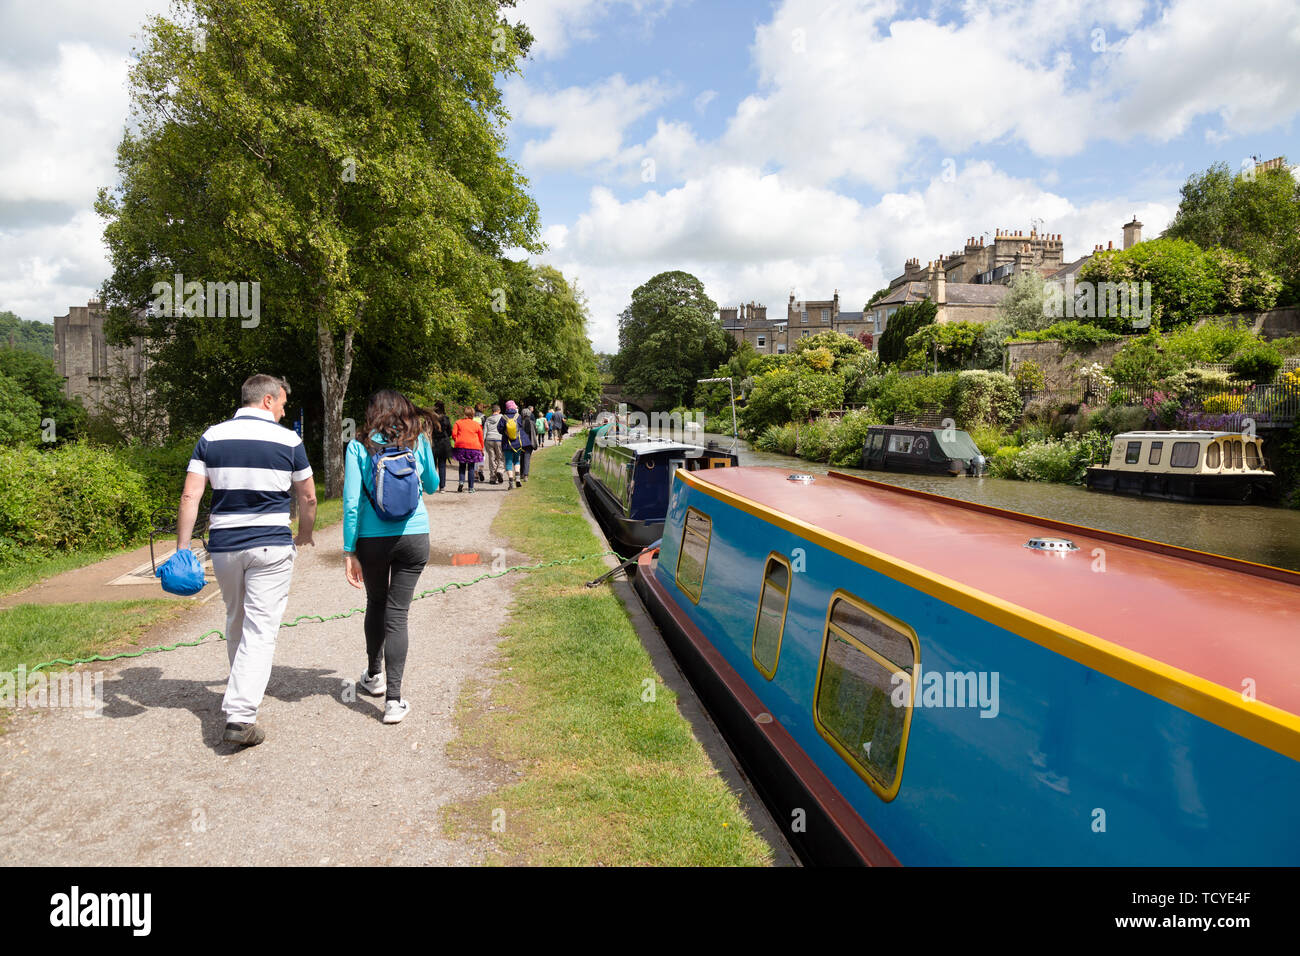 People walking outdoors in Summer UK - example of healthy lifestyle, Kennet and Avon Canal, Bath England Stock Photo